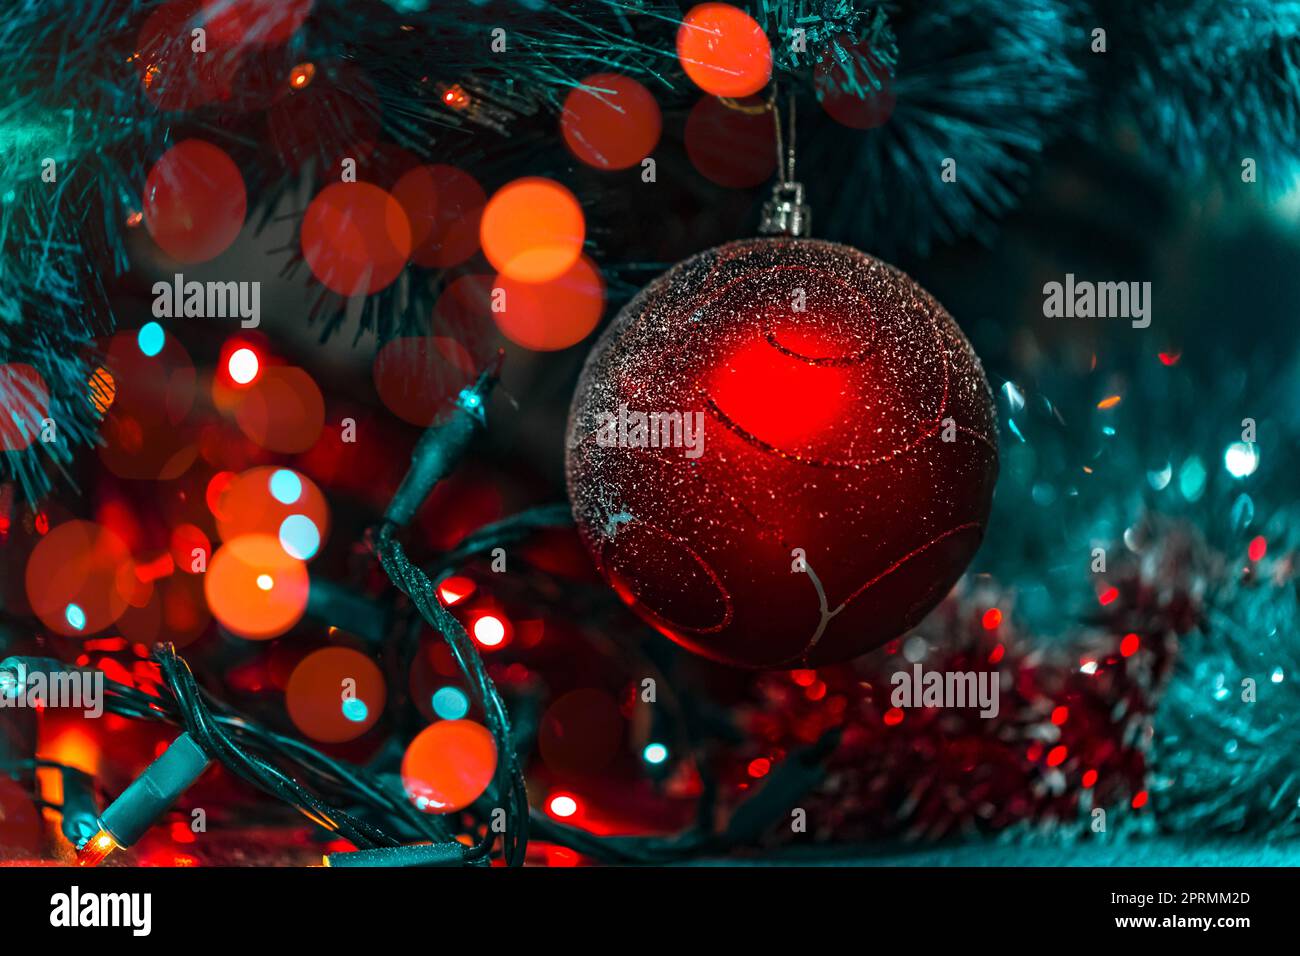 Beautiful Christmas and New Year Decorations. Holiday Background. Xmas Tree with Festive Glowing Lights and Red Shiny Ball. Stylish Baubles Ornament. Stock Photo